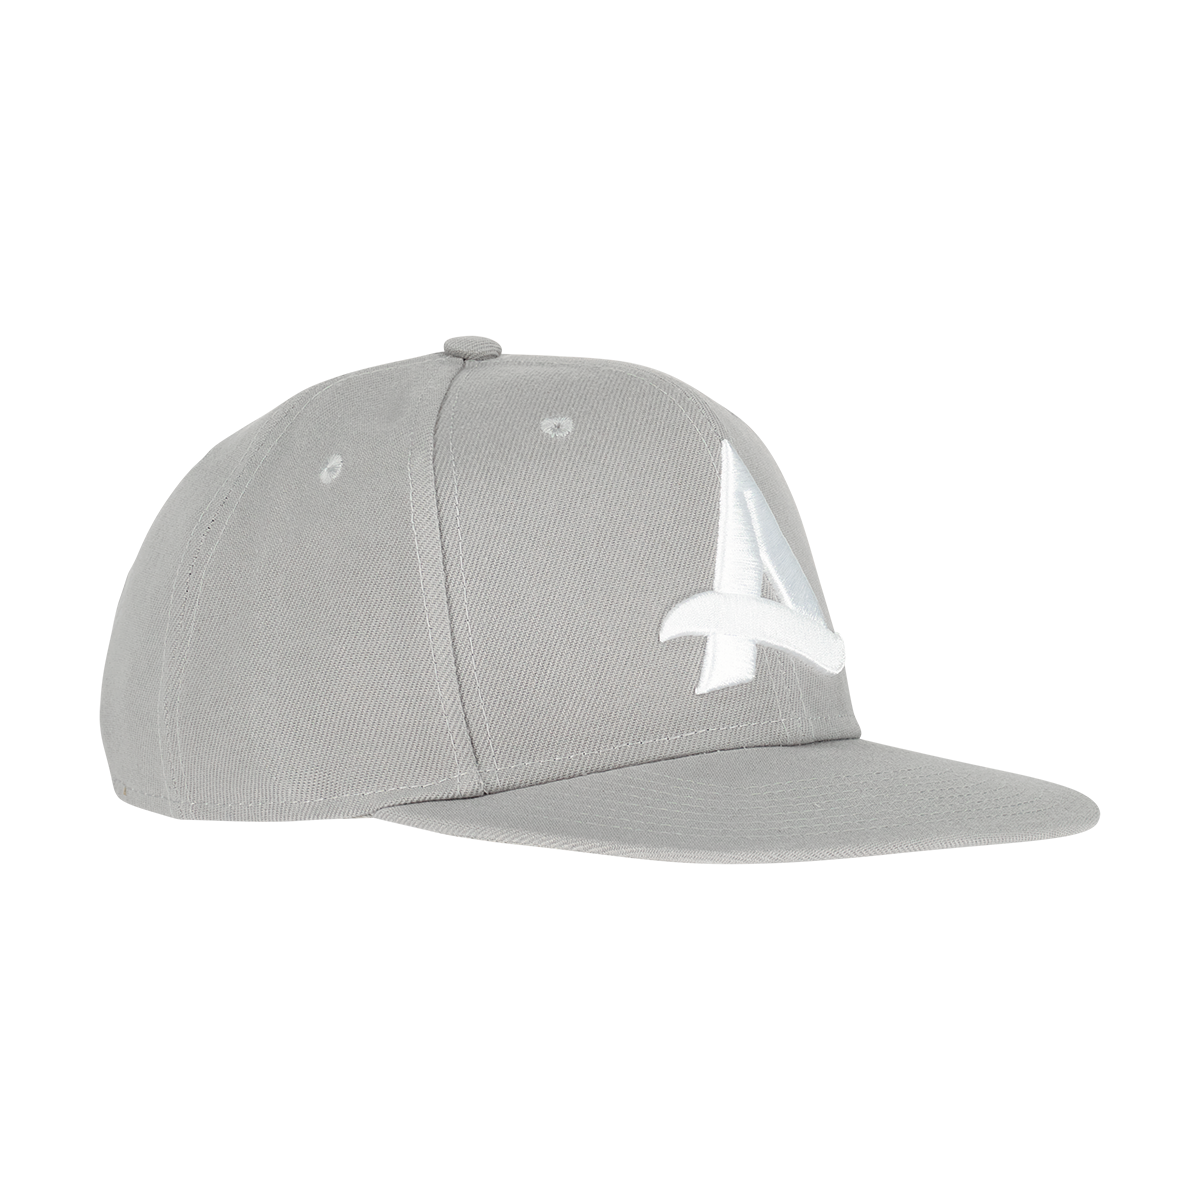 Afrojack_official-snapback-grey-front